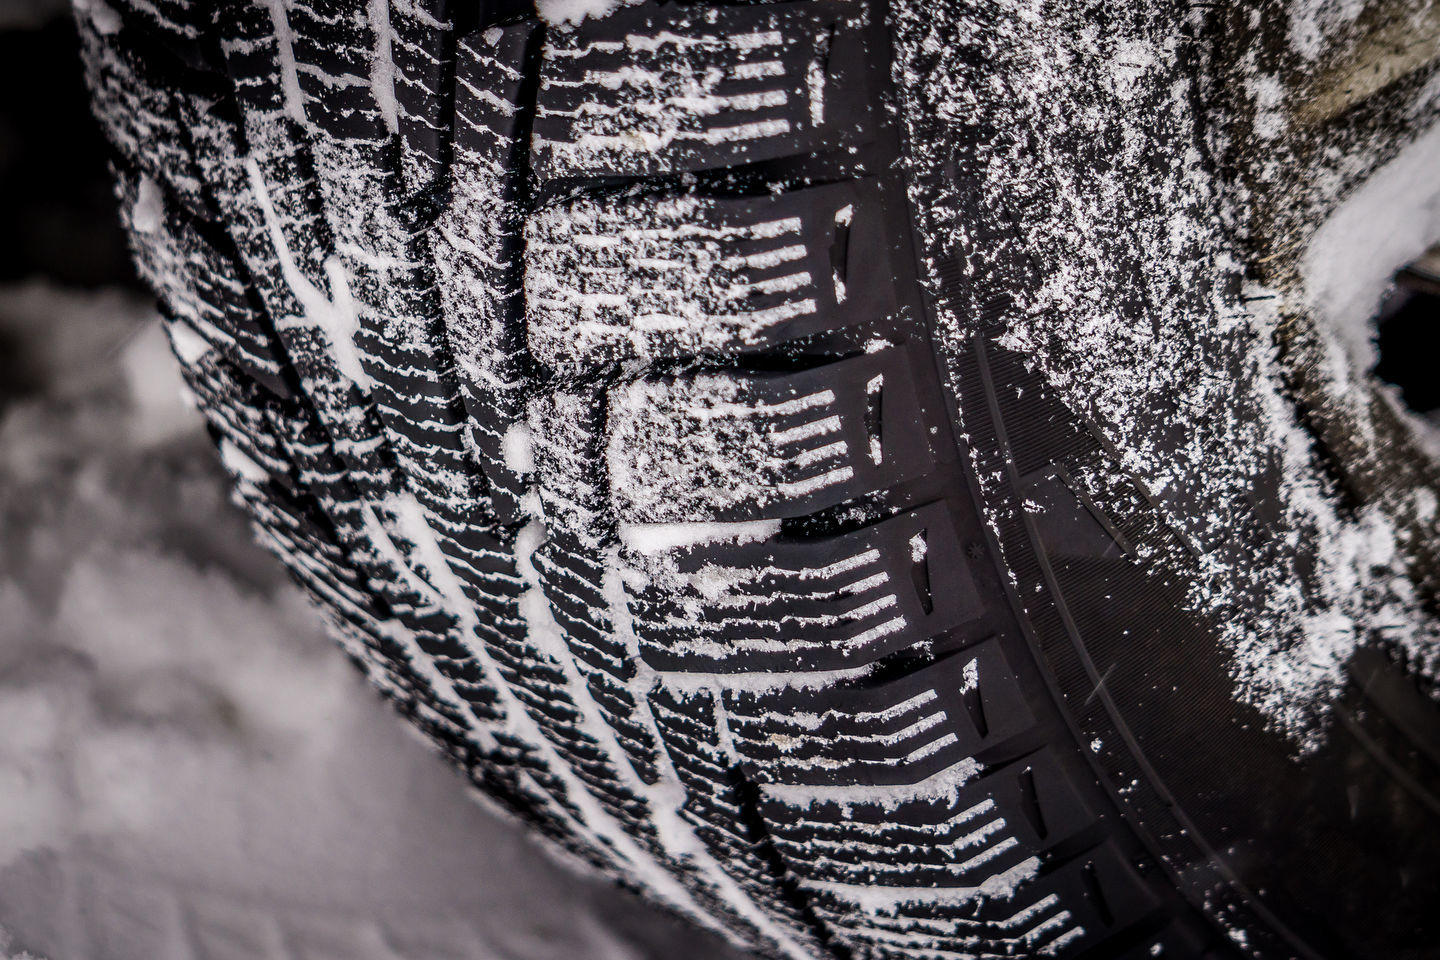 A few things you can check to determine if your Mazda needs new winter tires